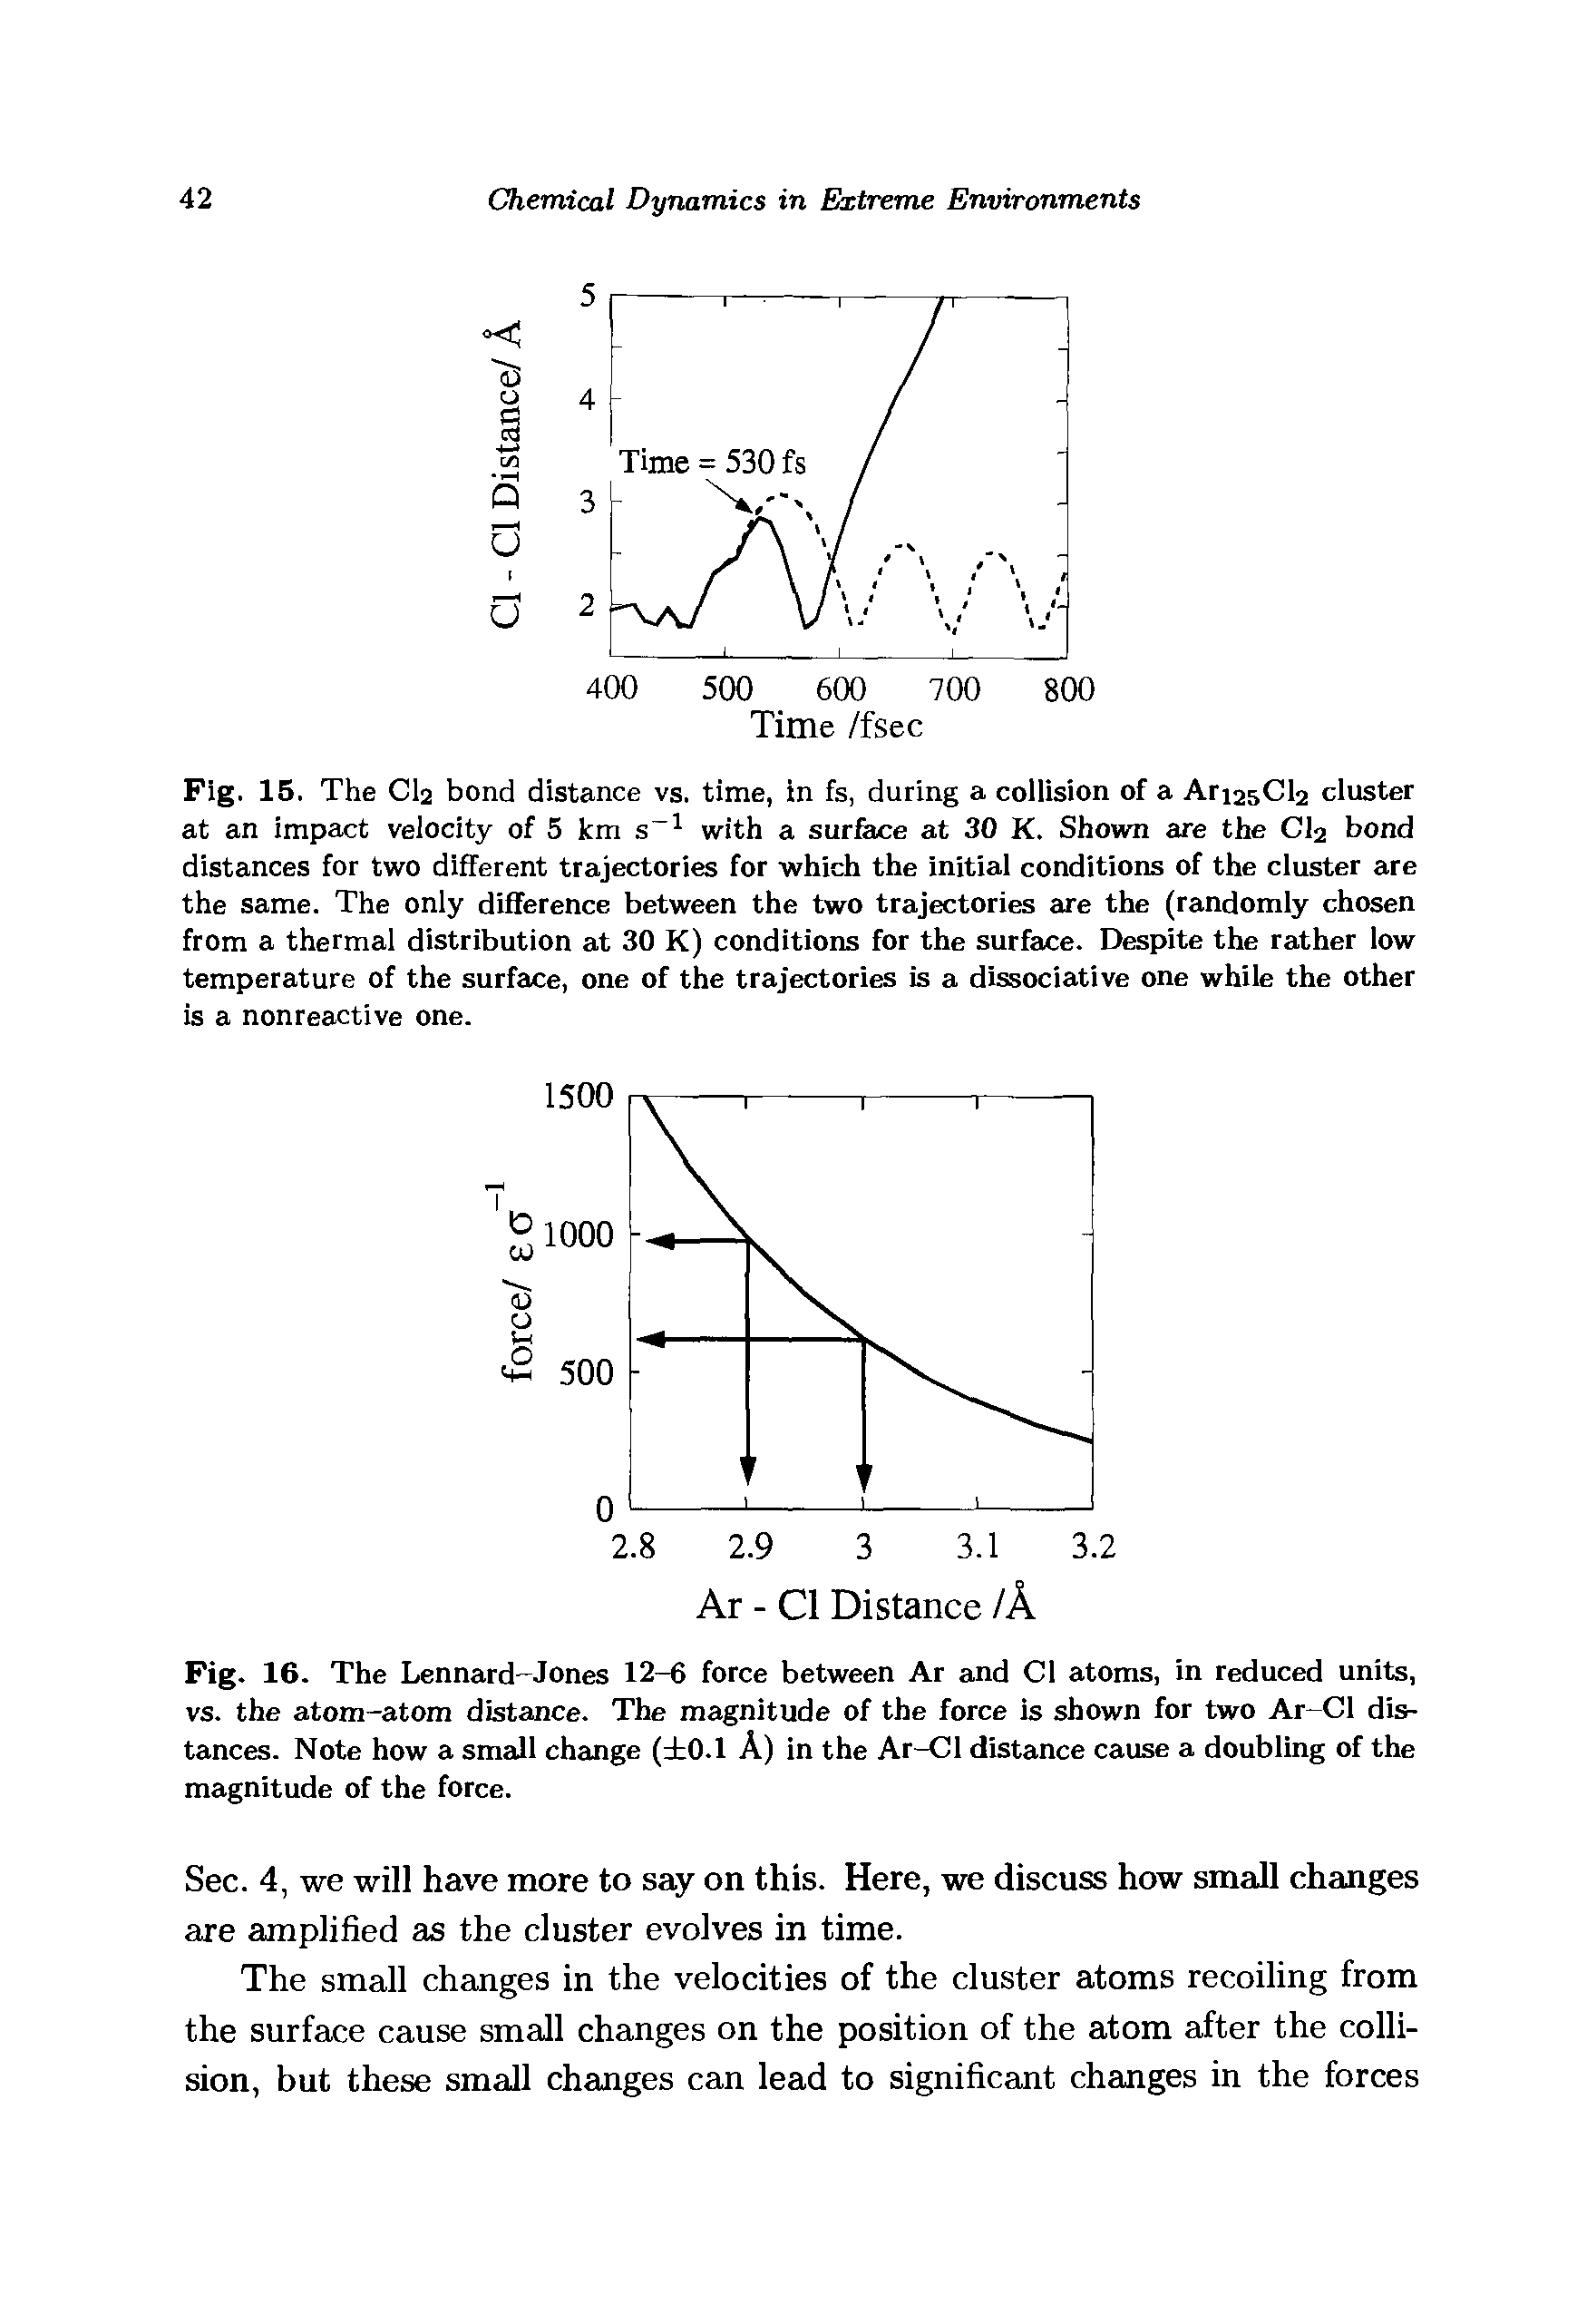 Fig. 15. The CI2 bond distance vs. time, in fs, during a collision of a Ari25Cl2 cluster at an impact velocity of 5 km with a surfece at 30 K. Shown are the CI2 bond distances for two different trajectories for which the initial conditions of the cluster are the same. The only difference between the two trajectories are the (randomly chosen from a thermal distribution at 30 K) conditions for the surface. Despite the rather low temperature of the surface, one of the trajectories is a dissociative one while the other is a nonreactive one.